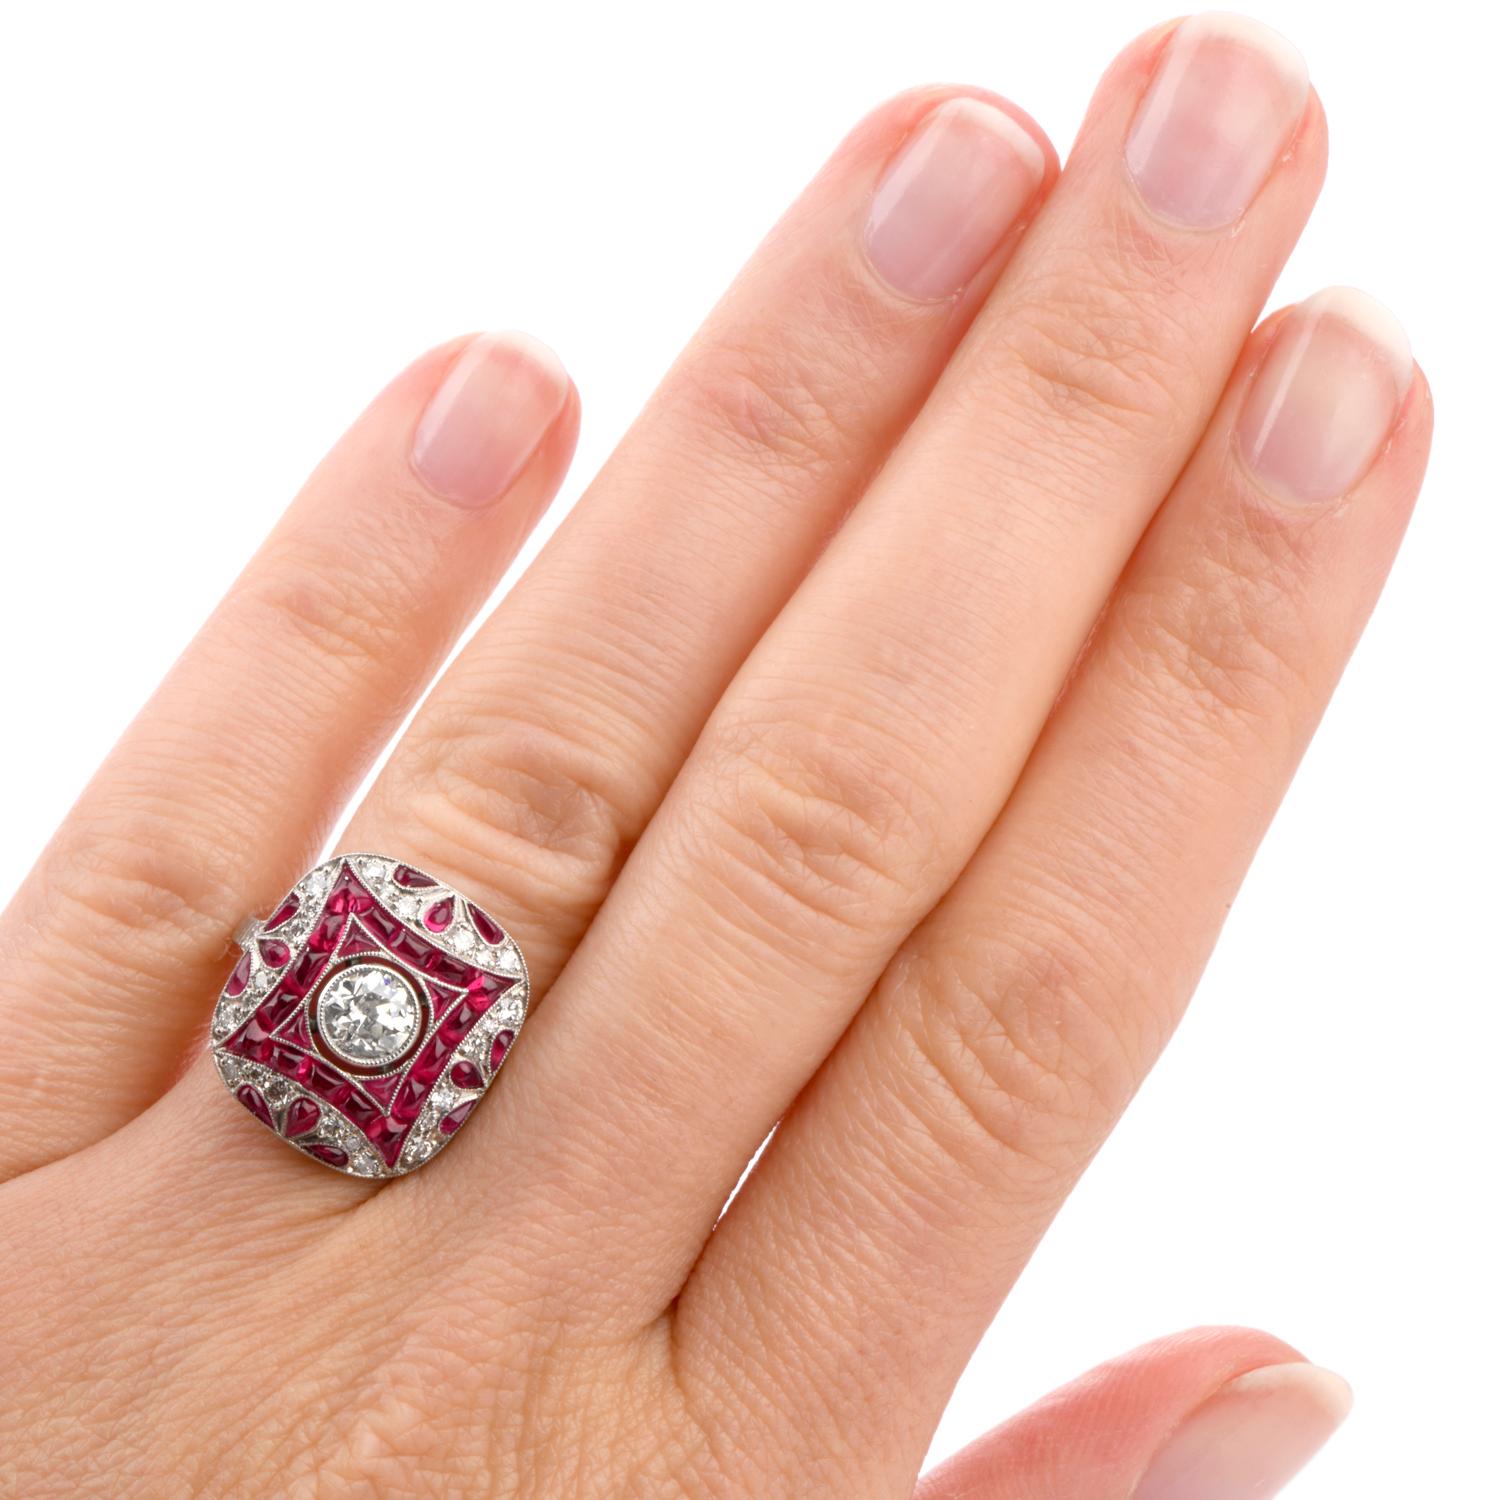 Discover the magic of the past with this stunning and vibrant Art Deco-inspired Ruby and Diamond

cocktail engagement ring crafted in Luxurious Platinum.

Featured in the center of this motif is one round faceted old European-cut diamond

weighing